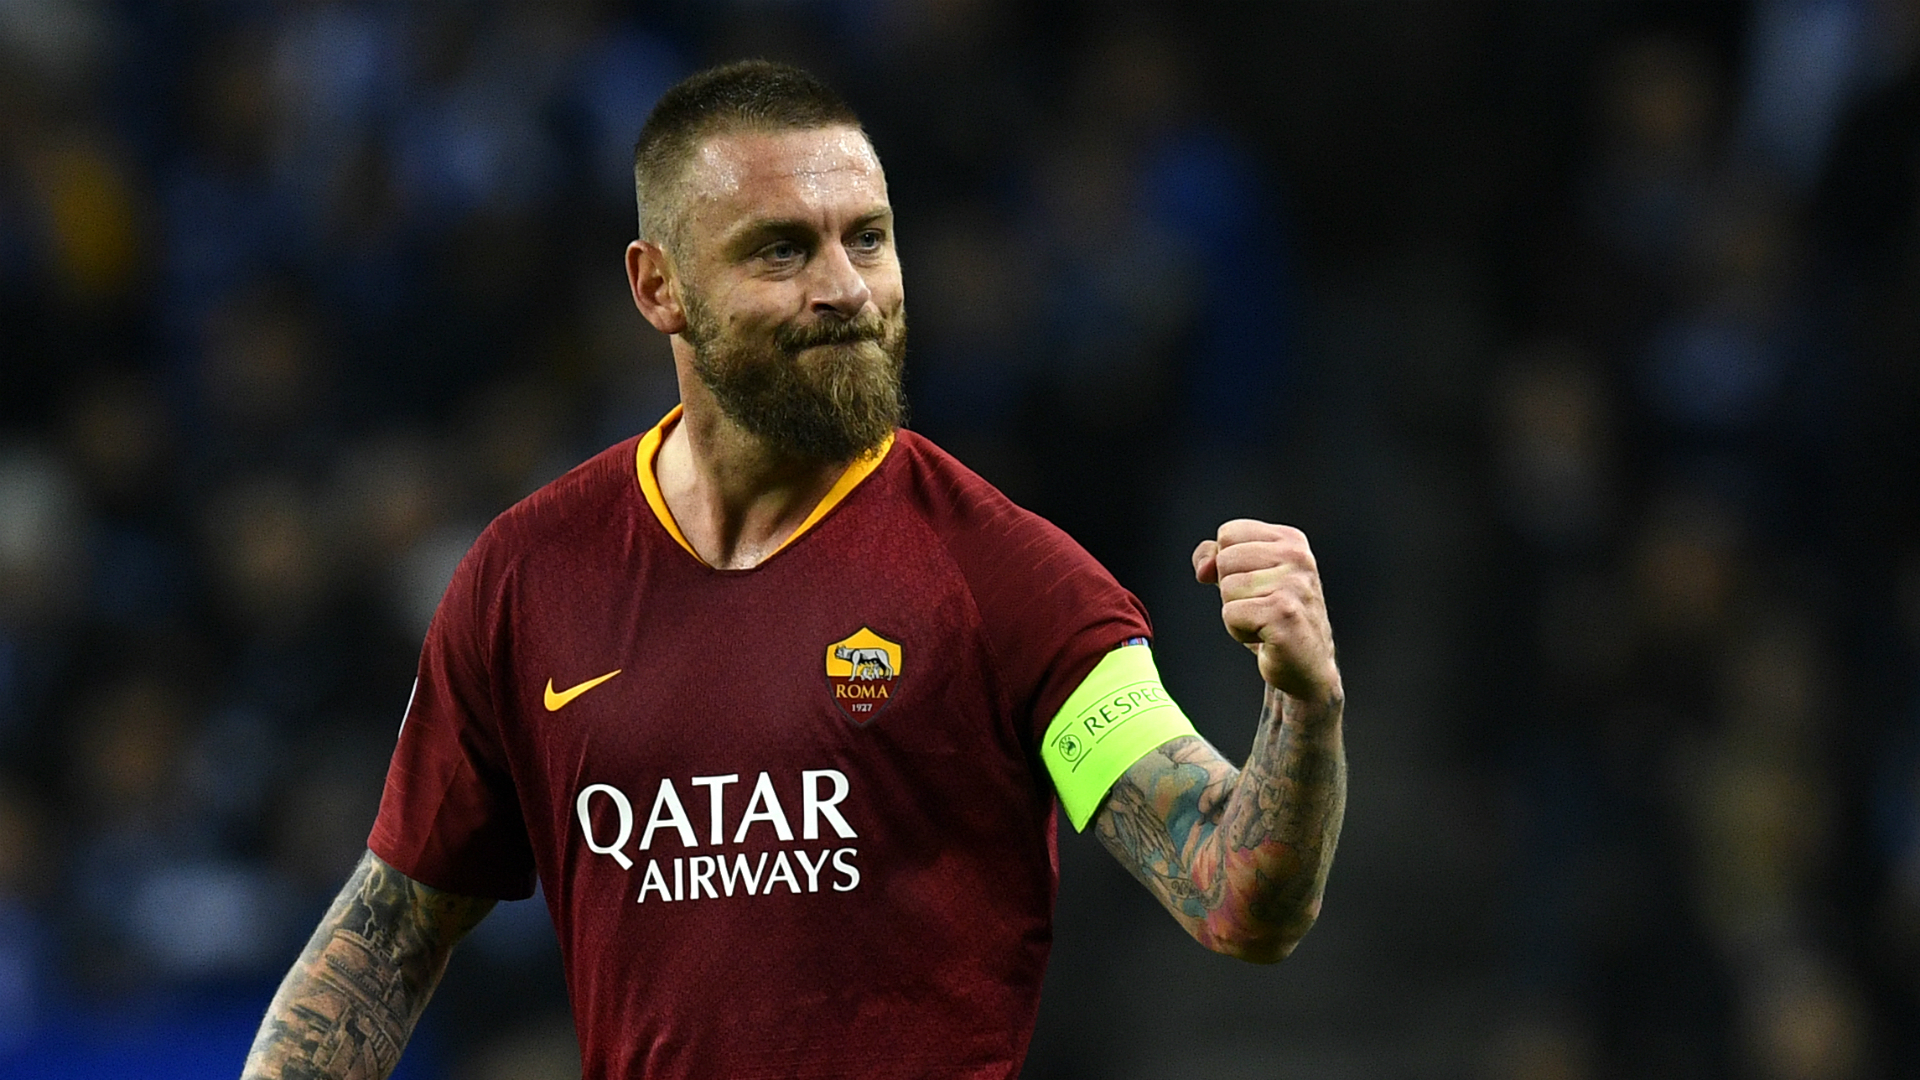 Daniele De Rossi expressed disappointment at leaving Roma and head coach Claudio Ranieri confirmed he wanted the club captain to stay.